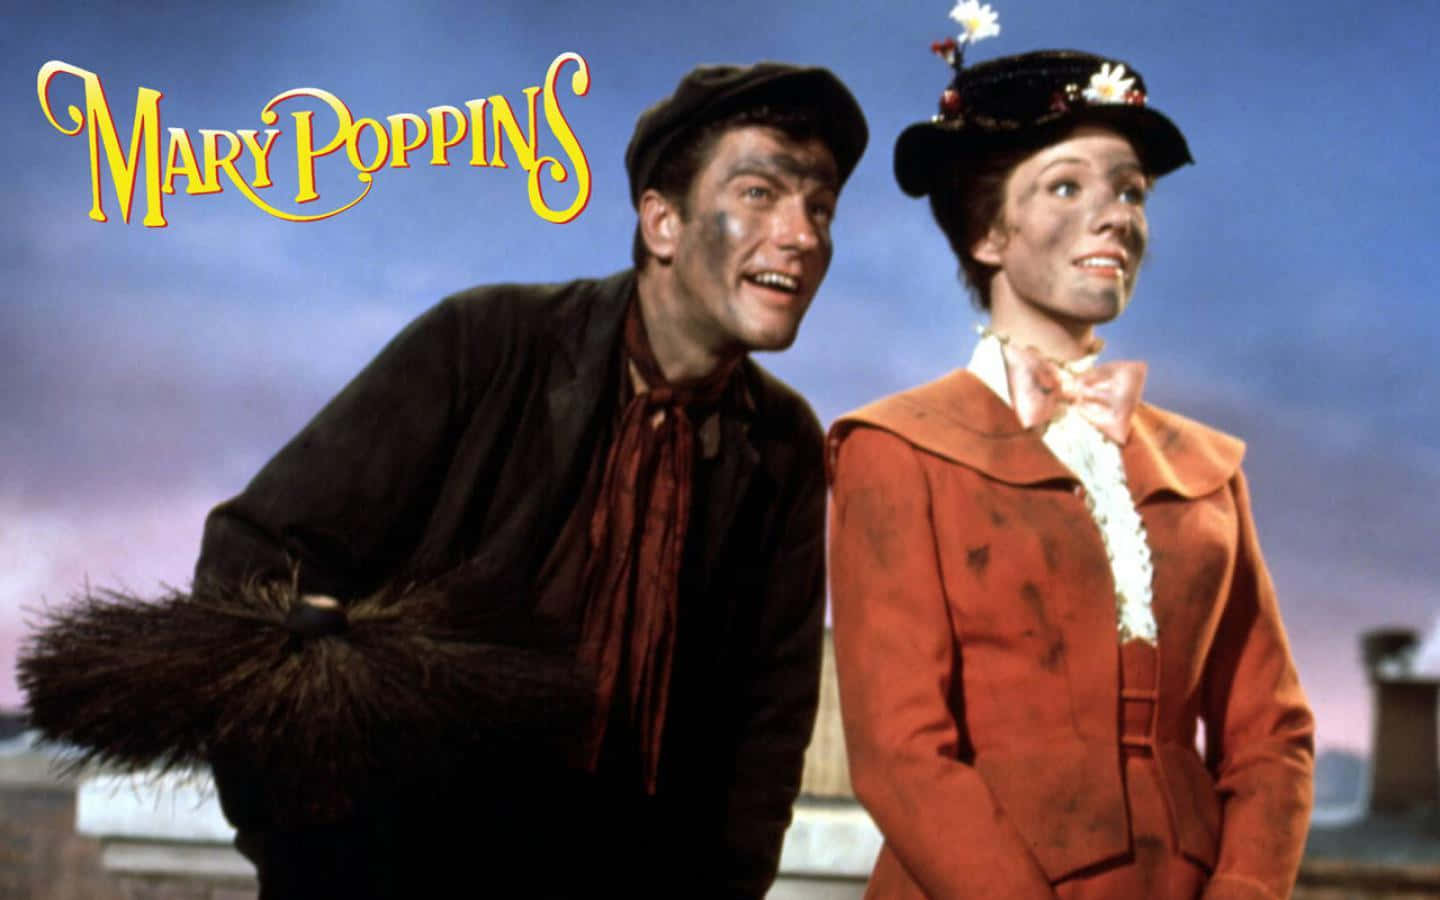 Mary Poppins Spreading Magic In The Sky Background